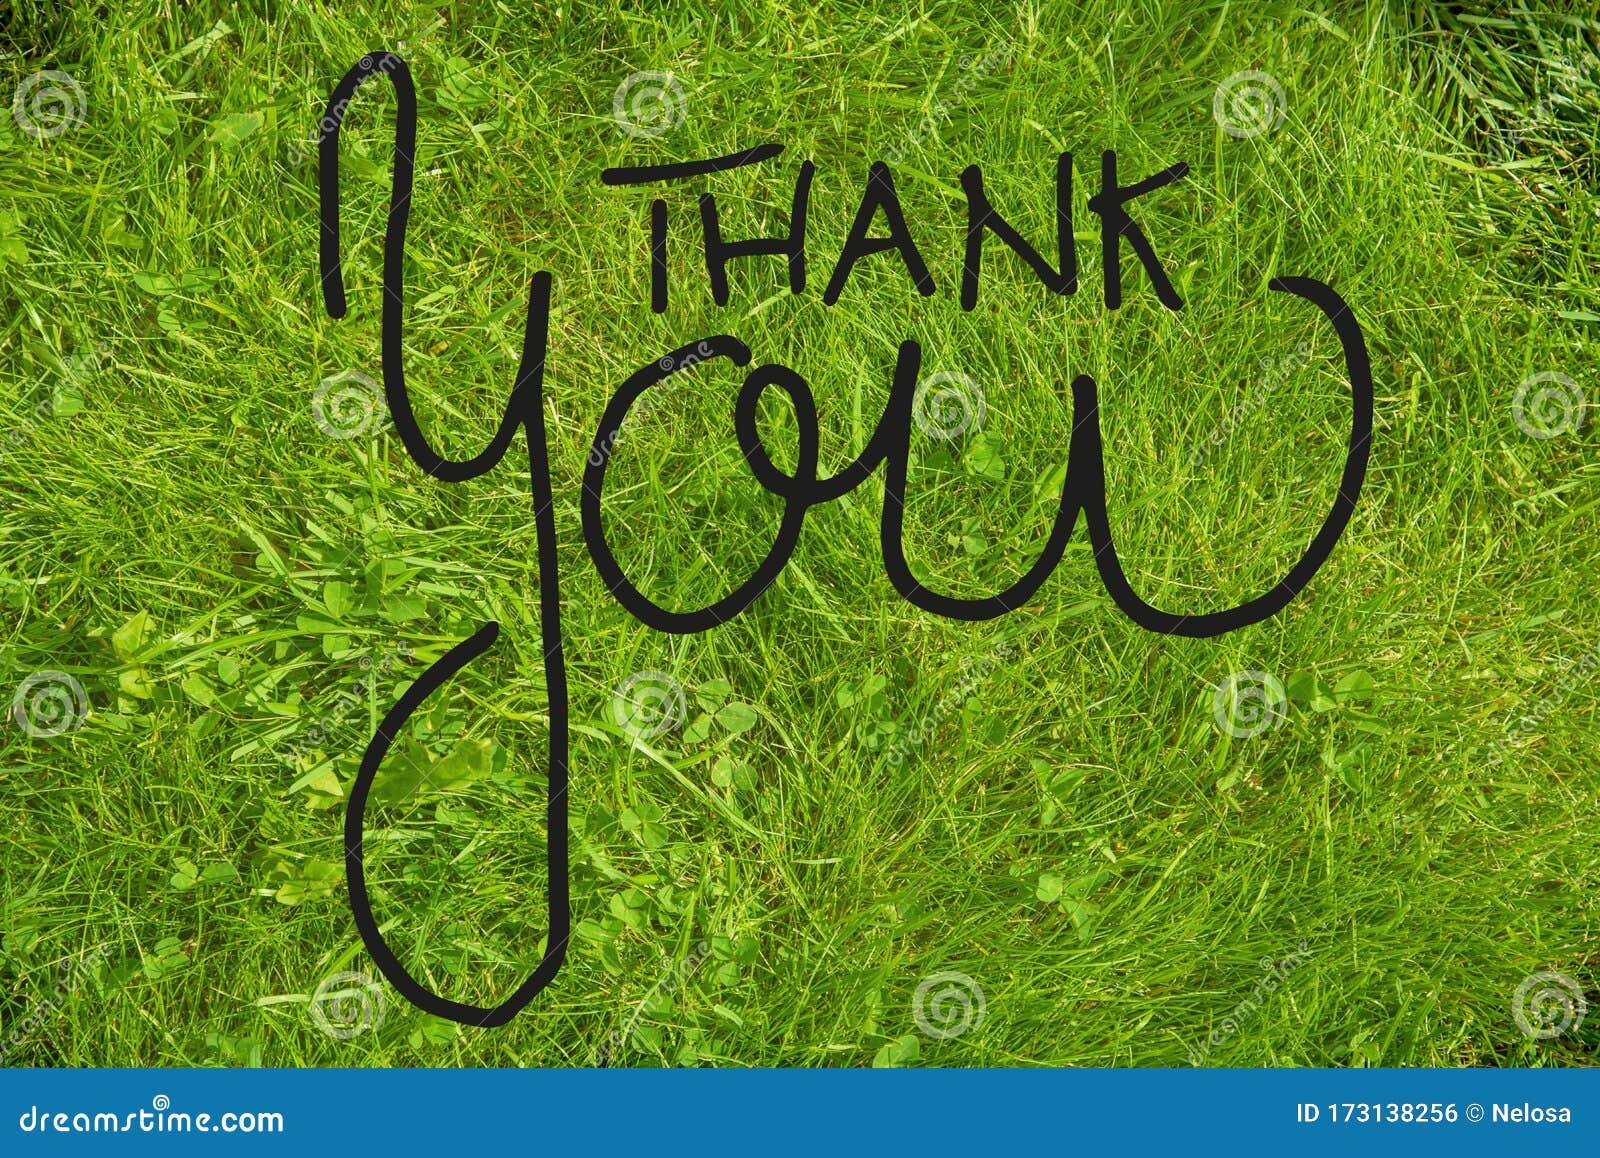 Green Grass Lawn or Meadow, Calligraphy Thank You Stock Photo ...